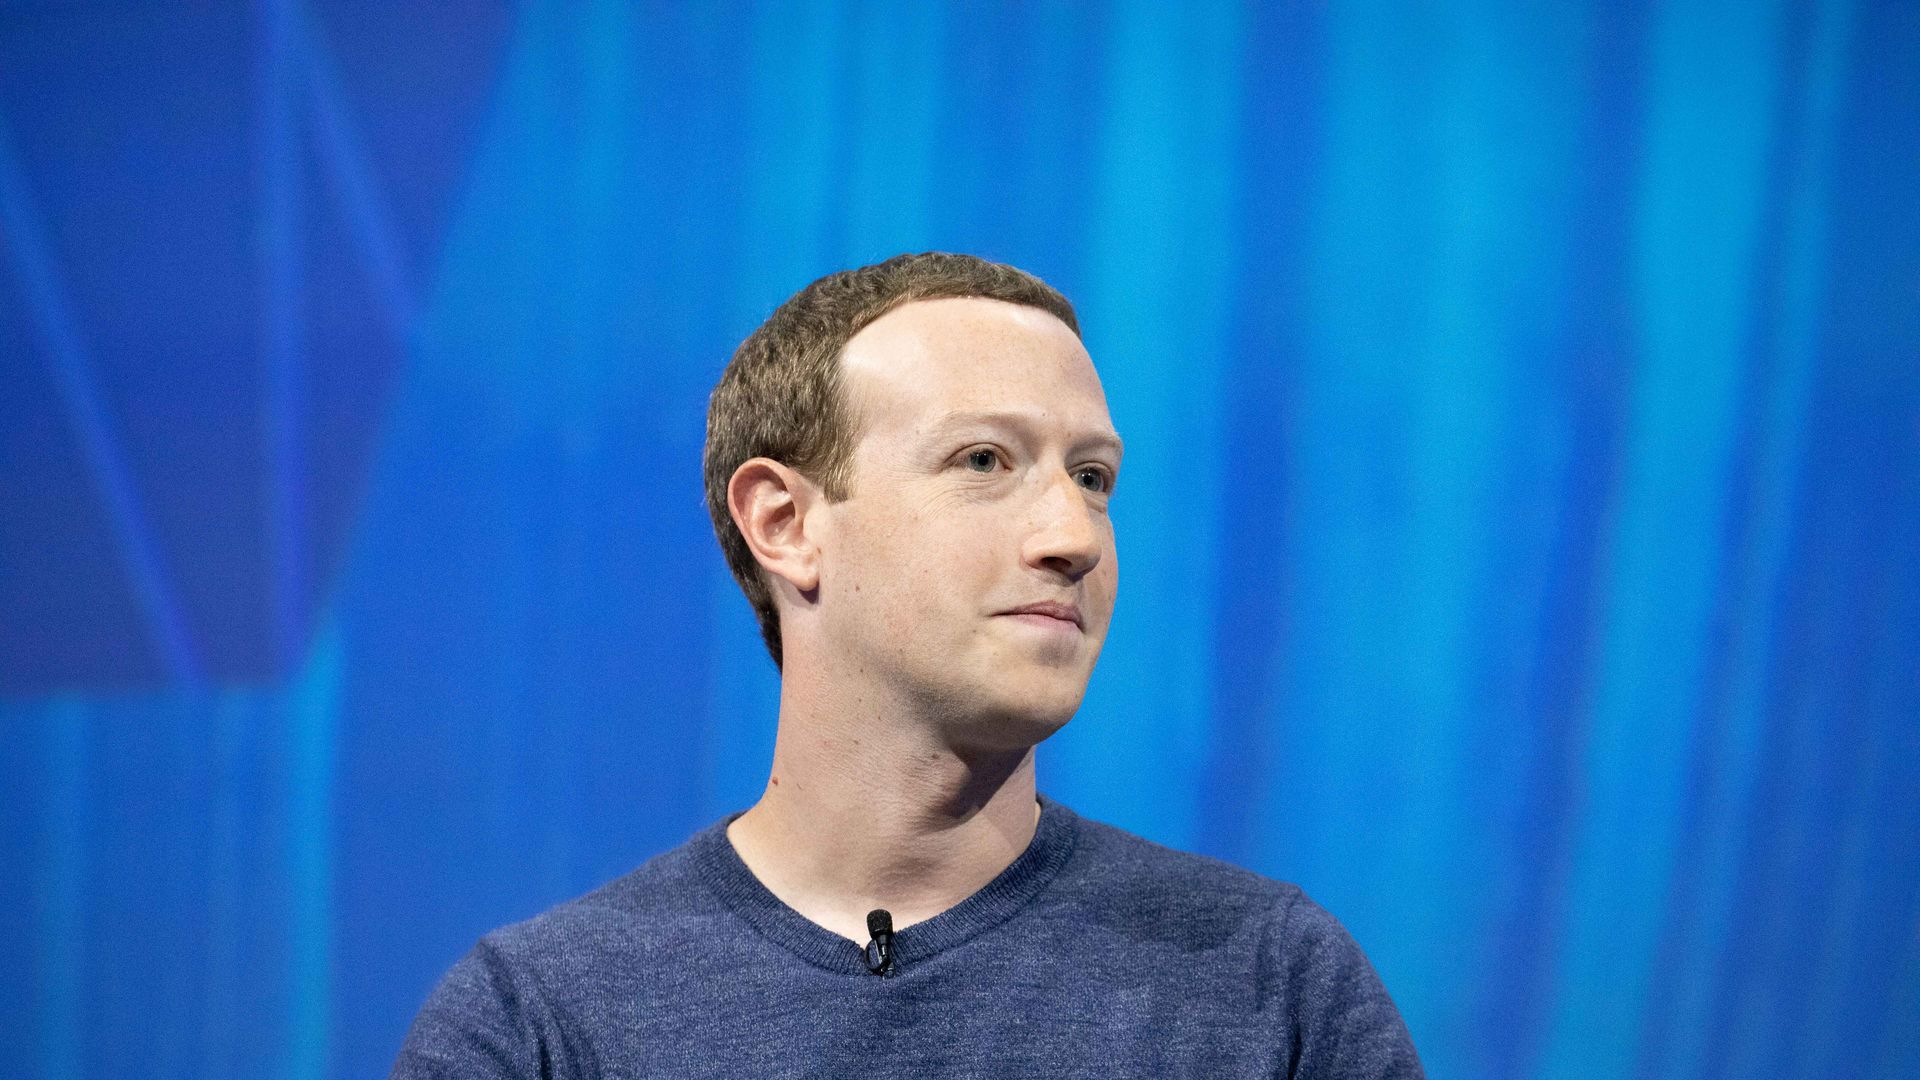 This is Mark Zuckerberg in front of a giant blue backdrop